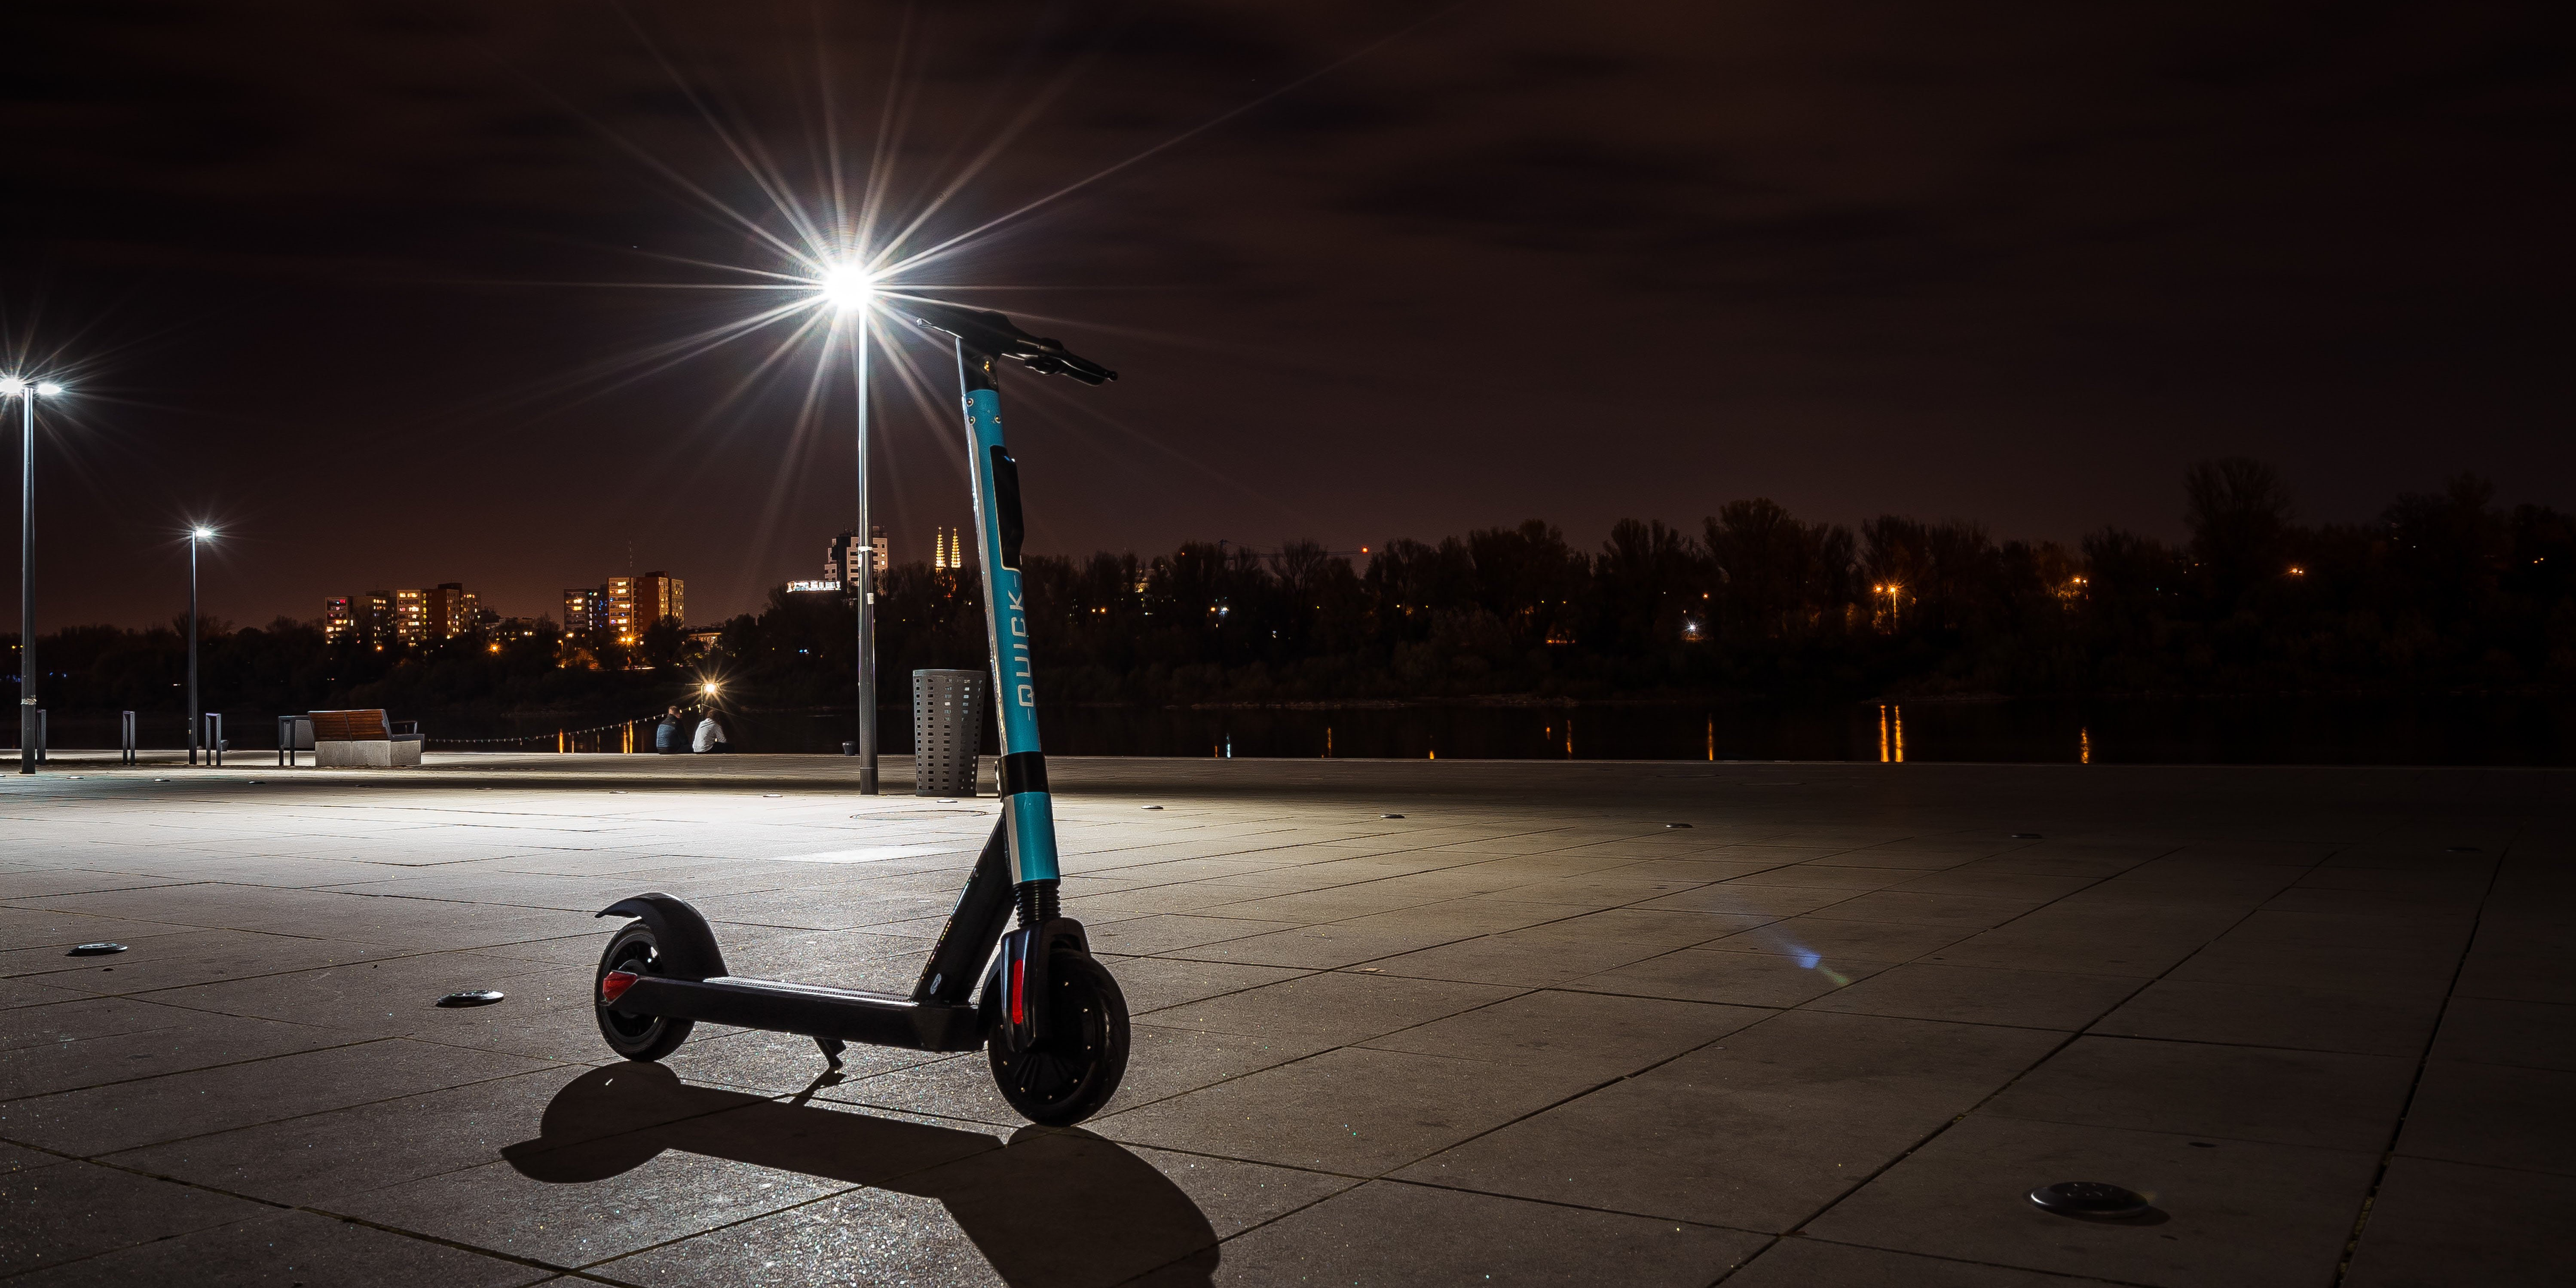 A solitary scooter in the dark